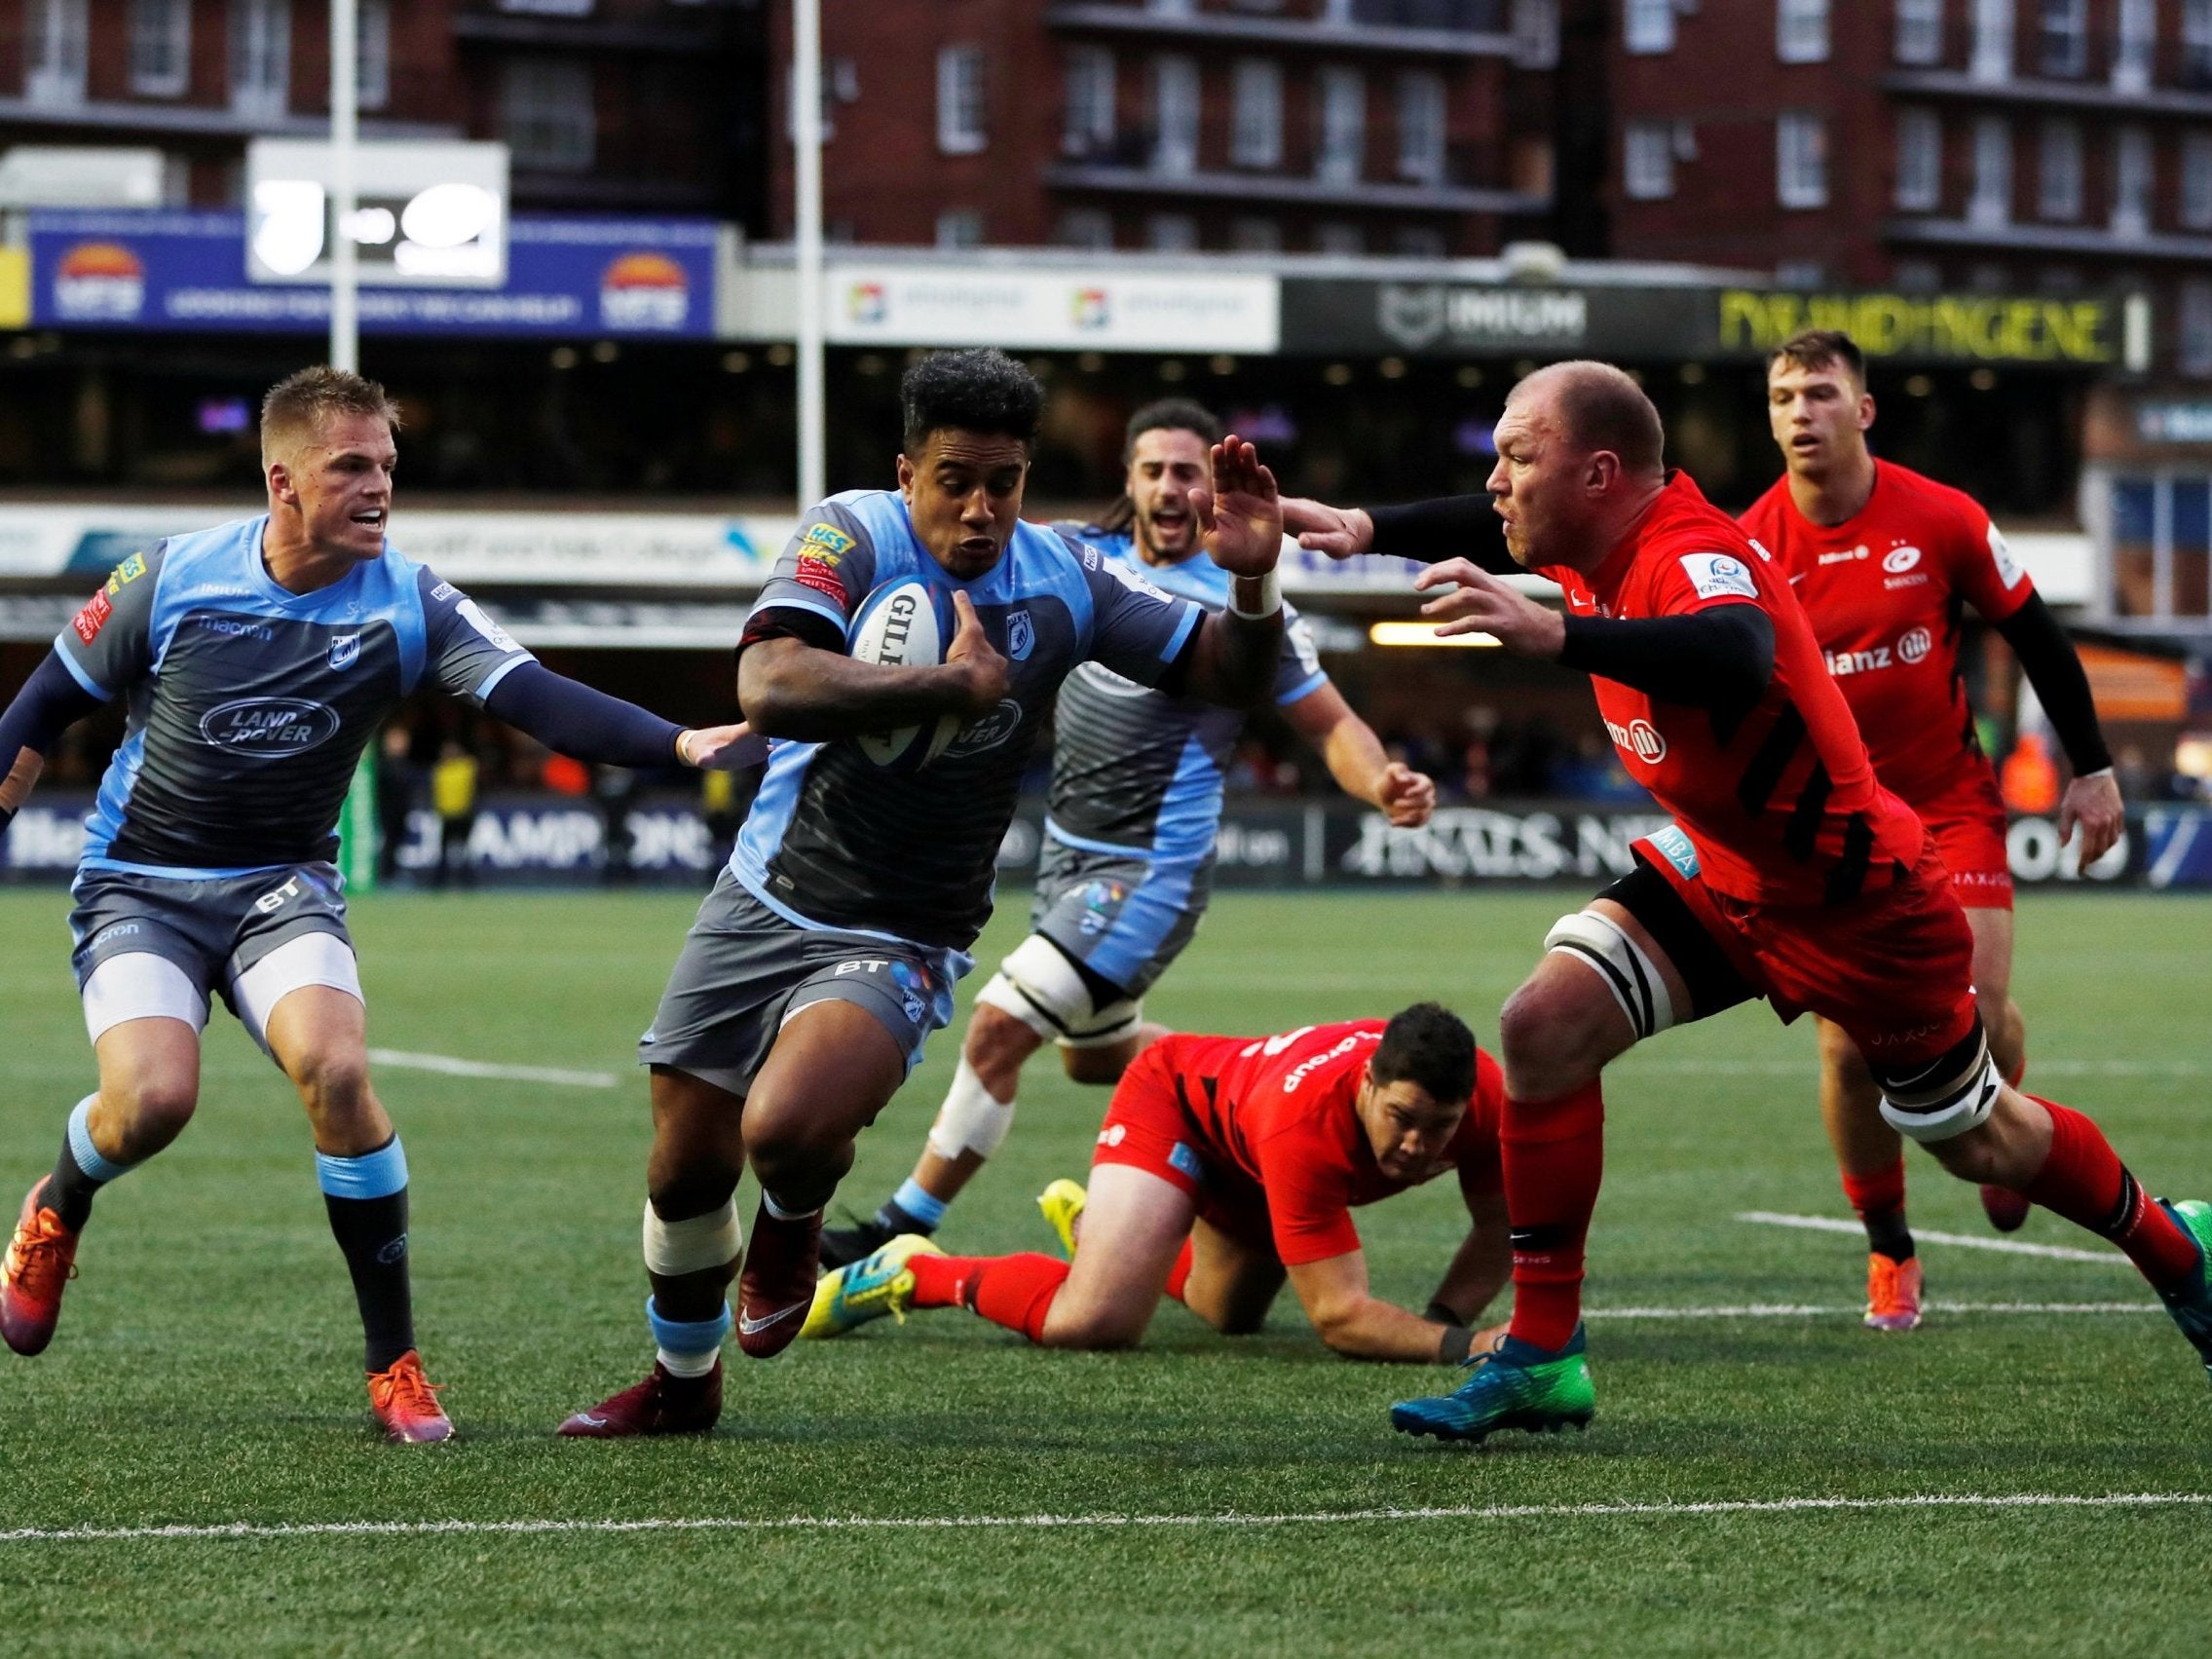 Ray Lee-Lo tries to evade the tackle of Saracens' Schalk Burger